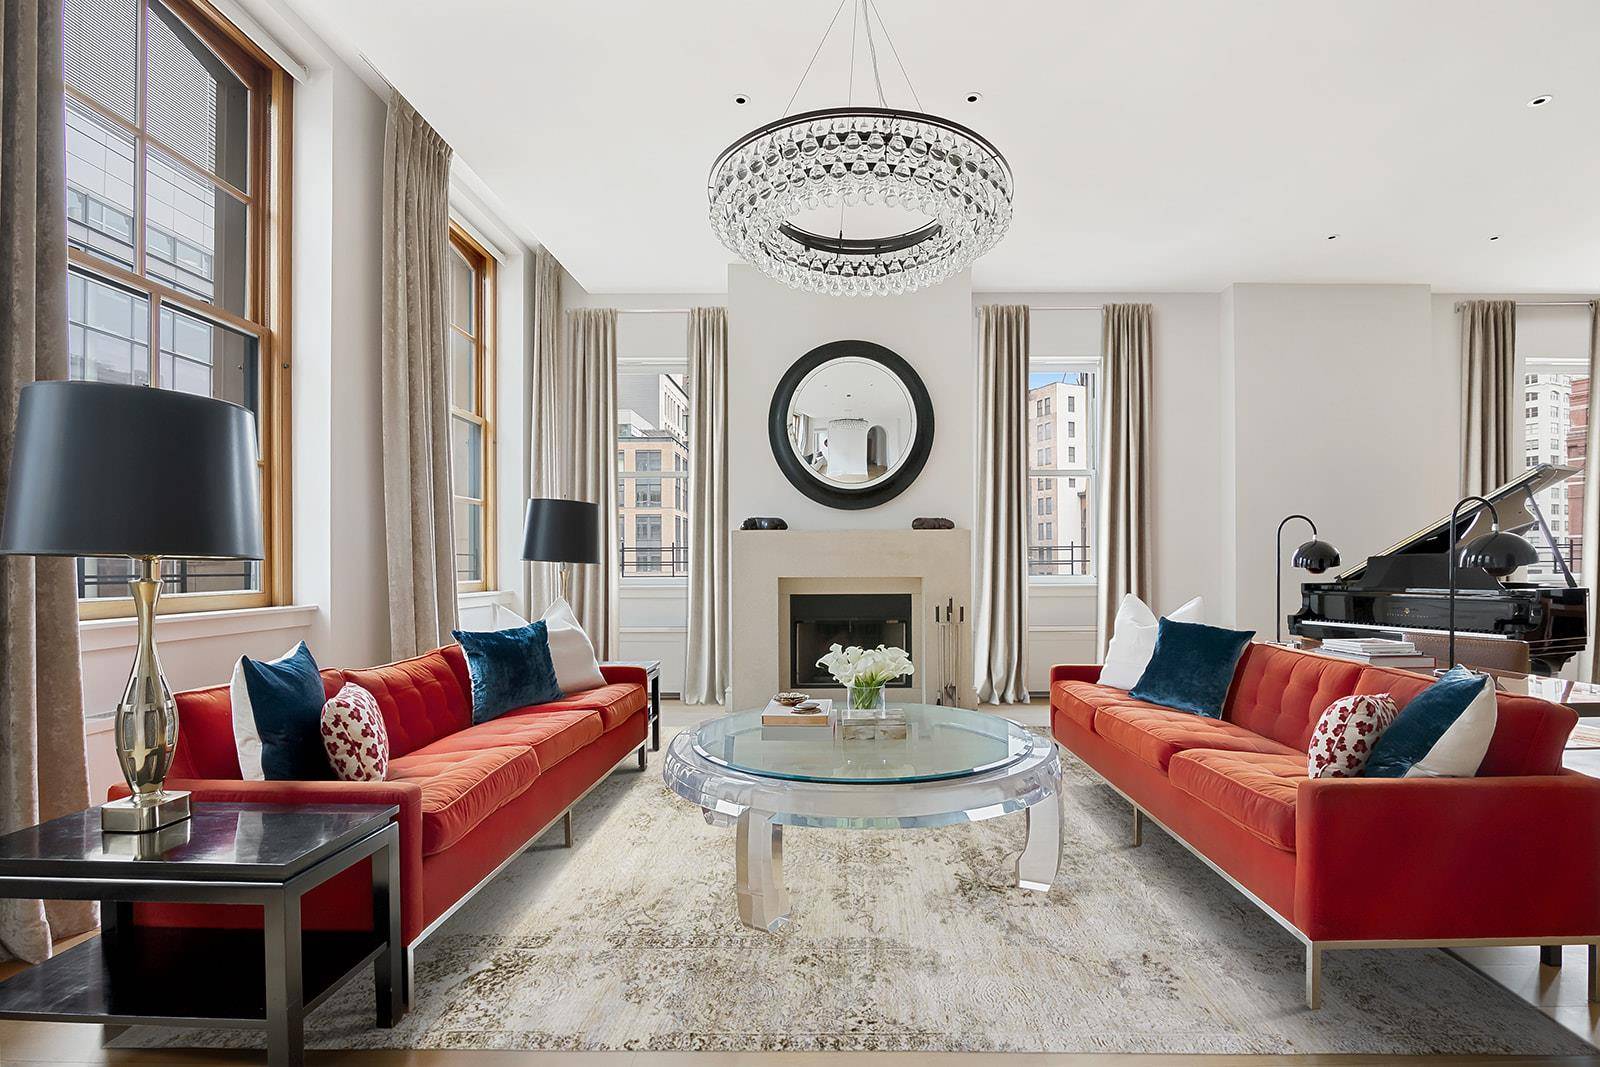 Situated in the middle of one of Tribeca's preeminent streets, the one block between both of Leonard Street's landmark districts and strikingly close to some of Tribeca's best in class ...